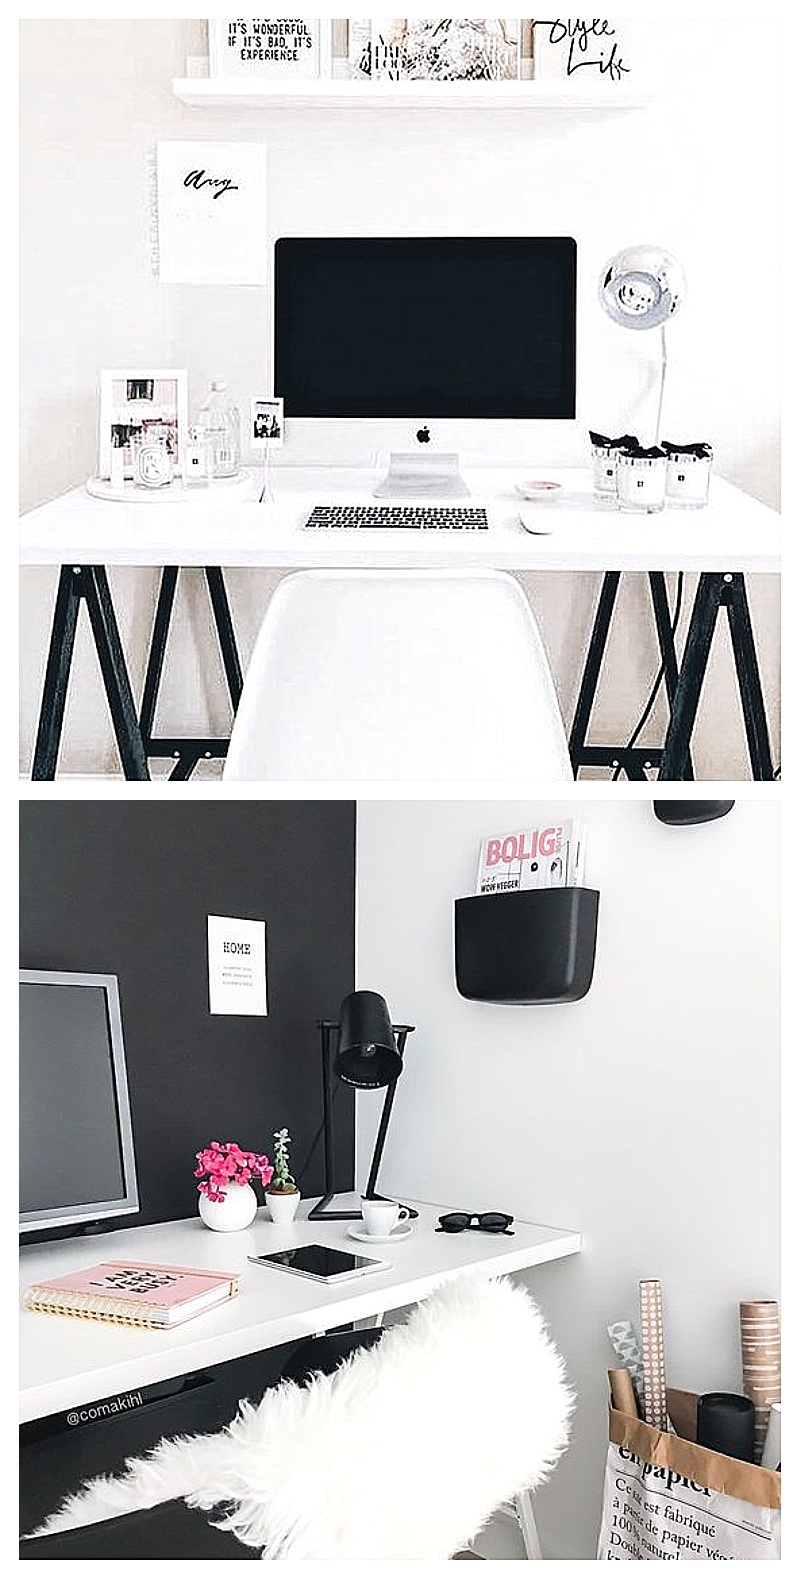 Home office ideas - beautiful home office decor , design and decorating ideas - beautiful feminine home office work space ideas for women and smart SMALL home office design and set up ideas for your home.  If you work from home, you'll love these home office ideas.